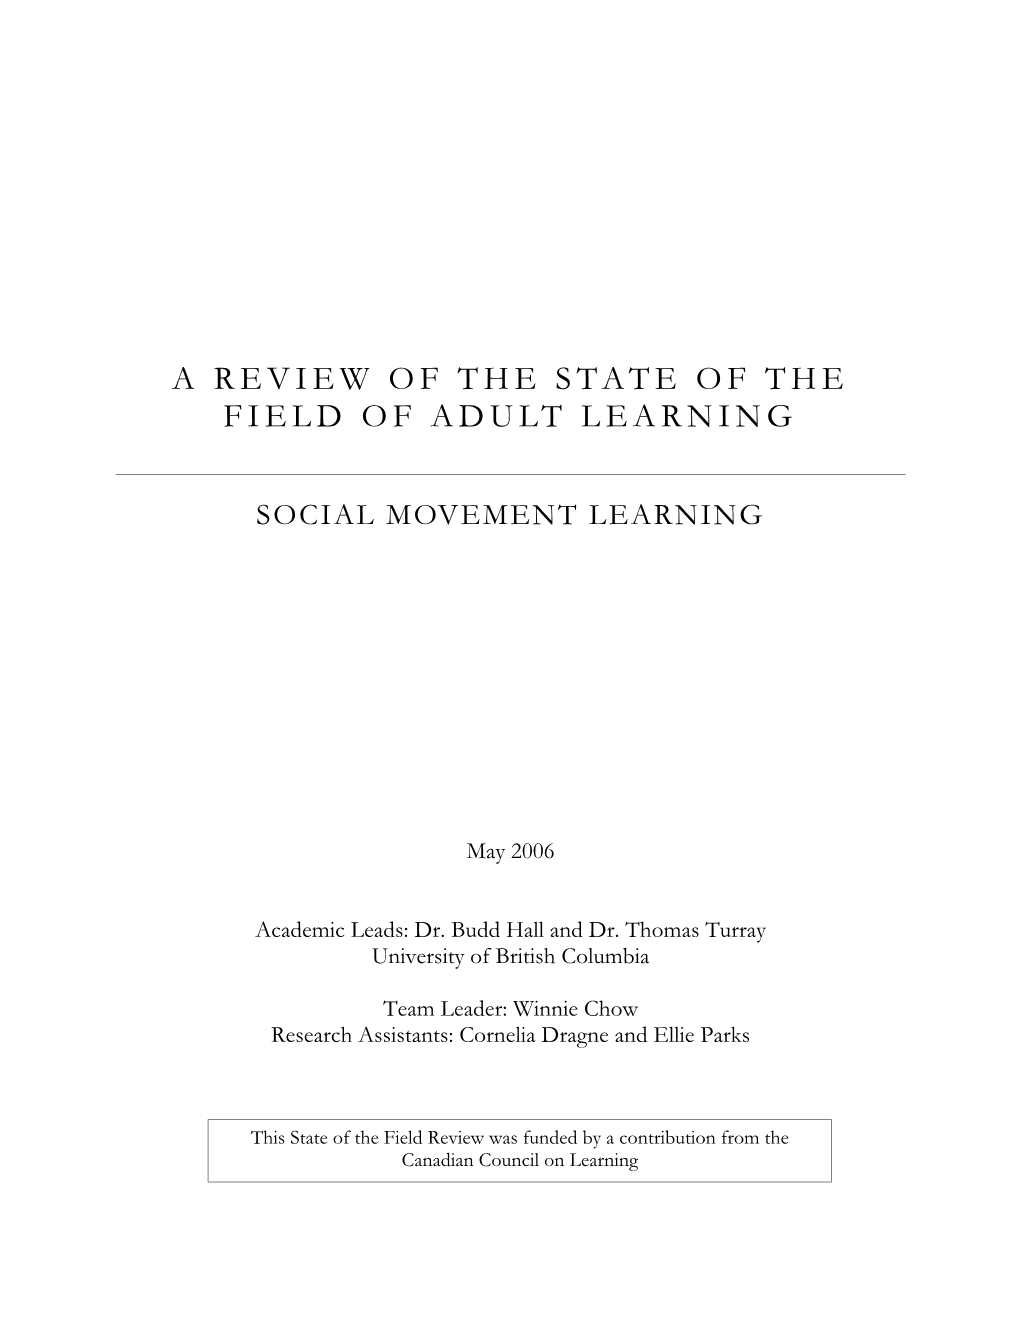 Social Movement Learning